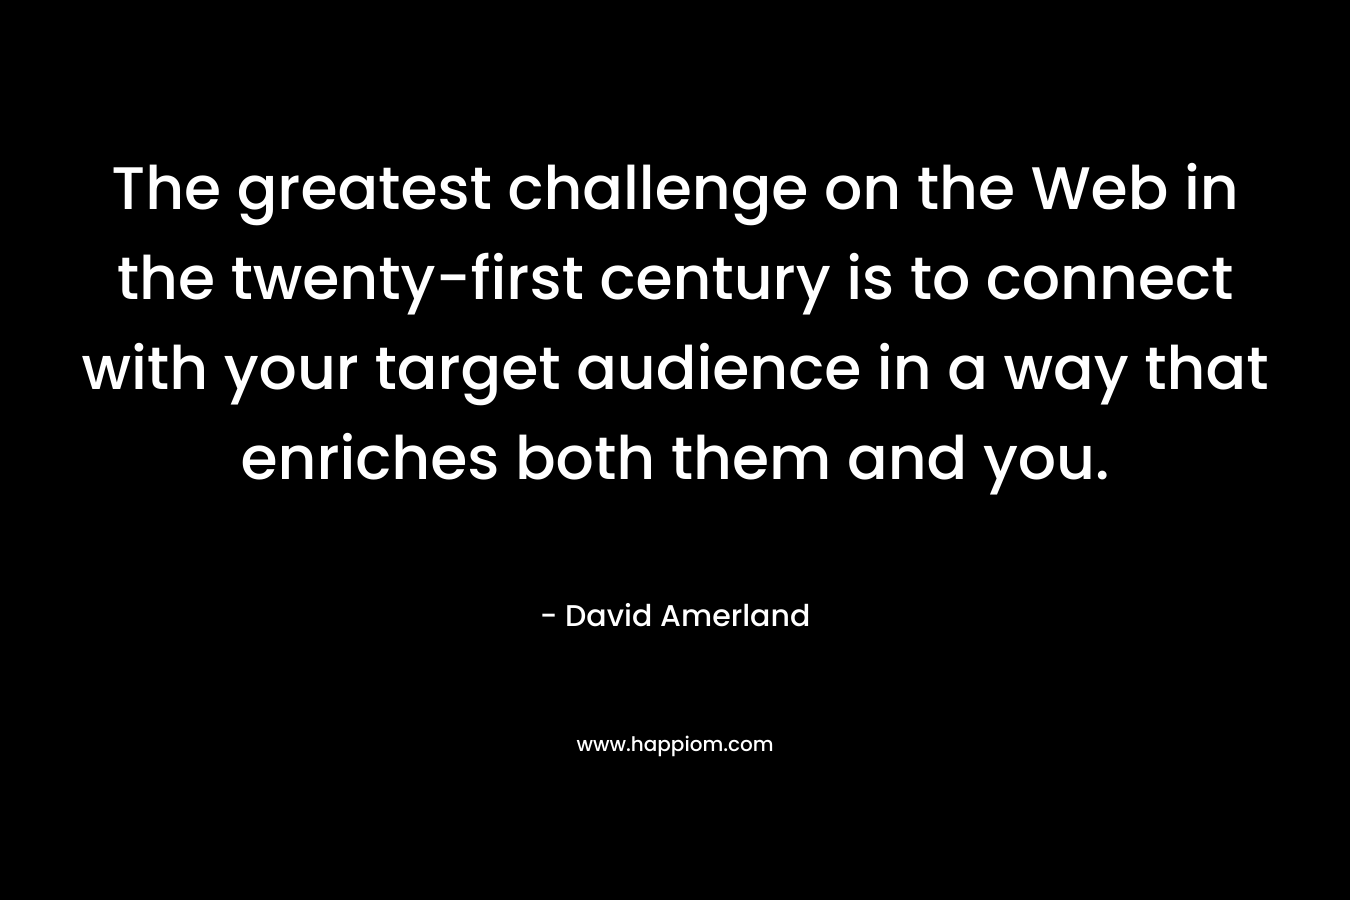 The greatest challenge on the Web in the twenty-first century is to connect with your target audience in a way that enriches both them and you. – David Amerland